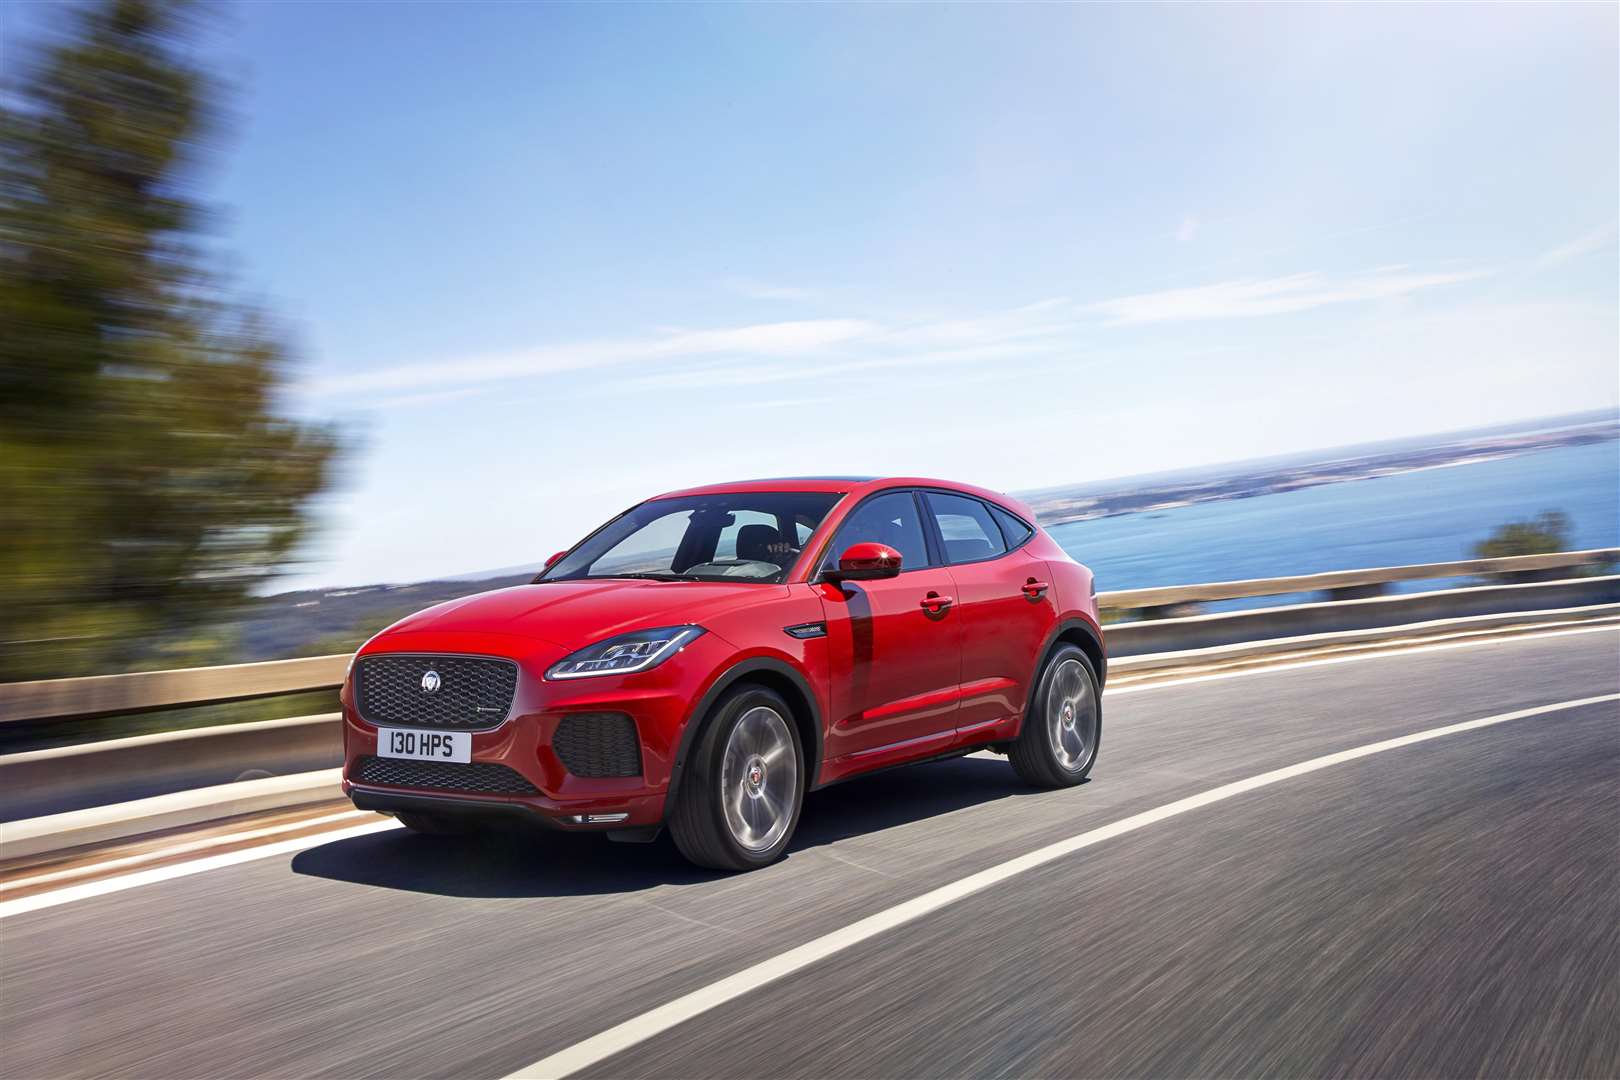 Inspiration for the E-pace was taken from the F-Type (4511184)